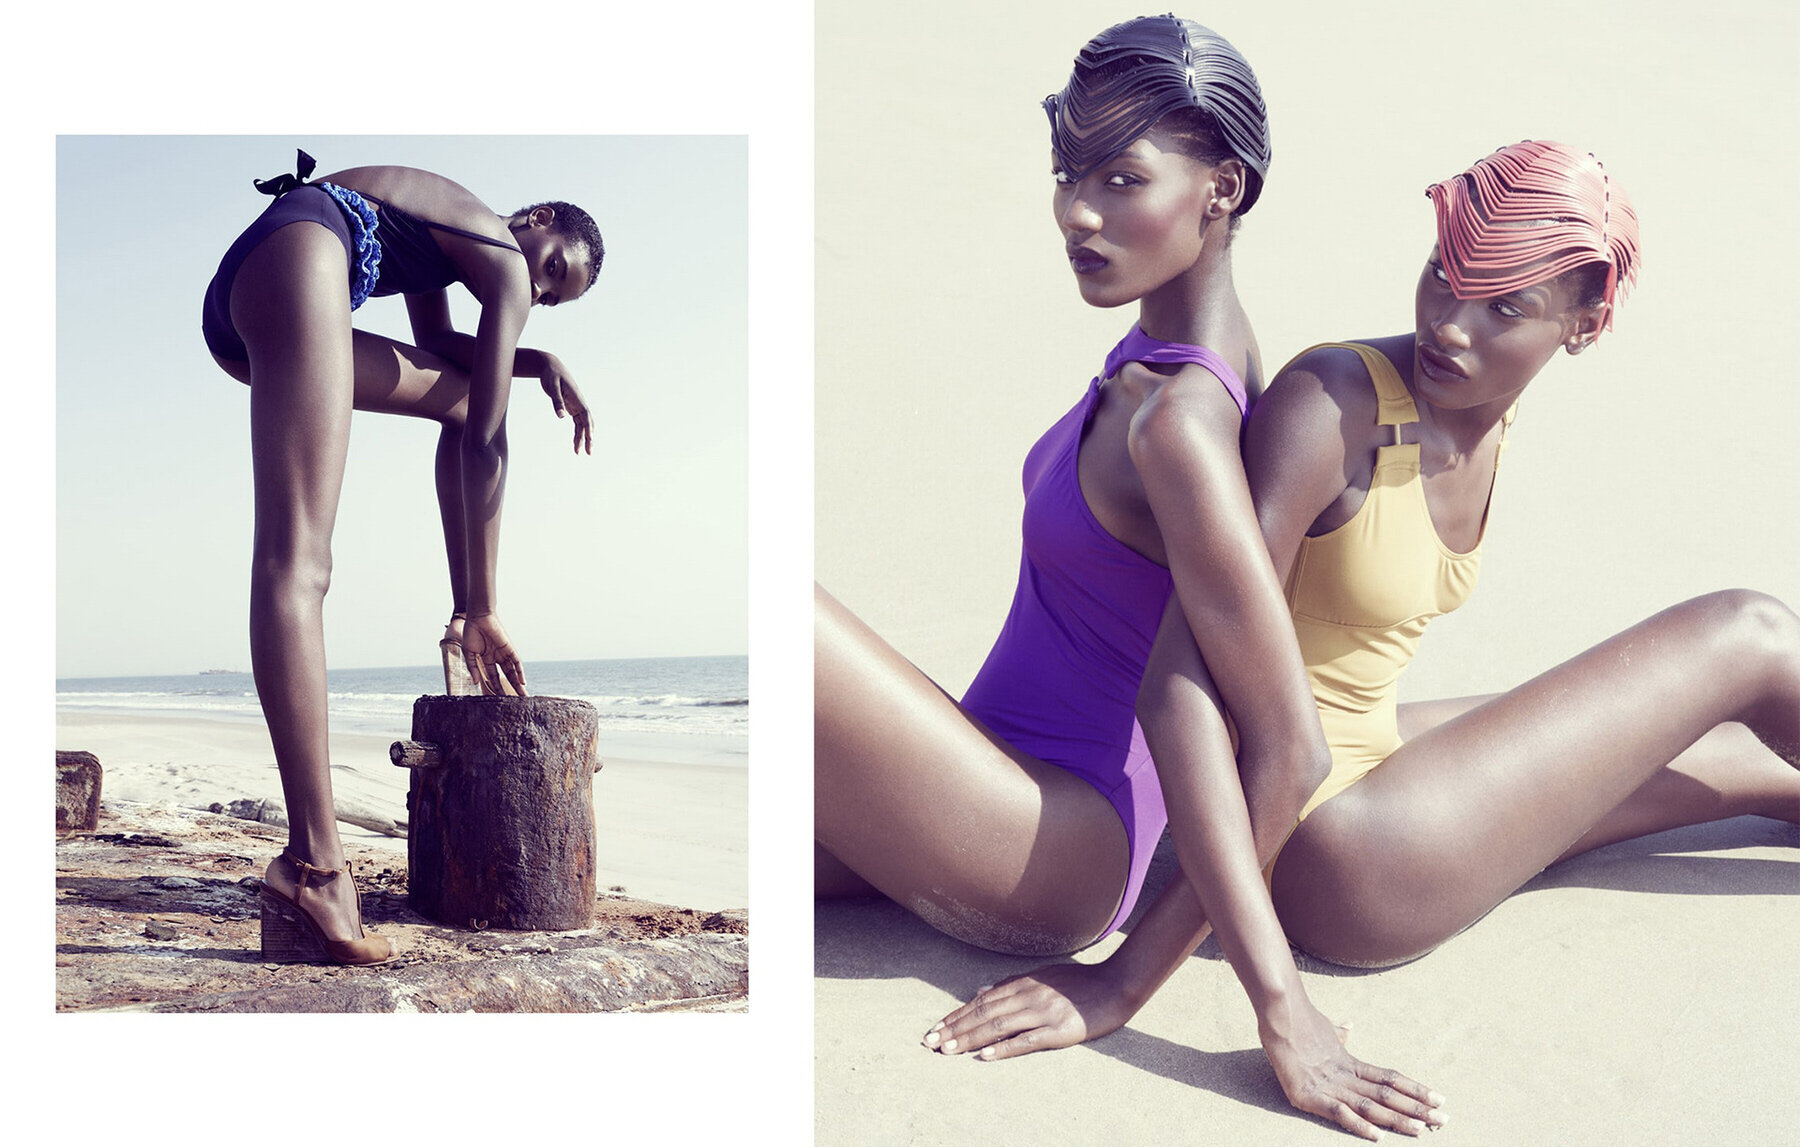  Kalu and Bruna,    Cemitério Dos Navios, Luanda, Angola    Shot as part of Elite Model Look x Arise magazine,  We travelled to Luanda to take part in the televised final of the model competition and work with the finalist shooting at the famous ship